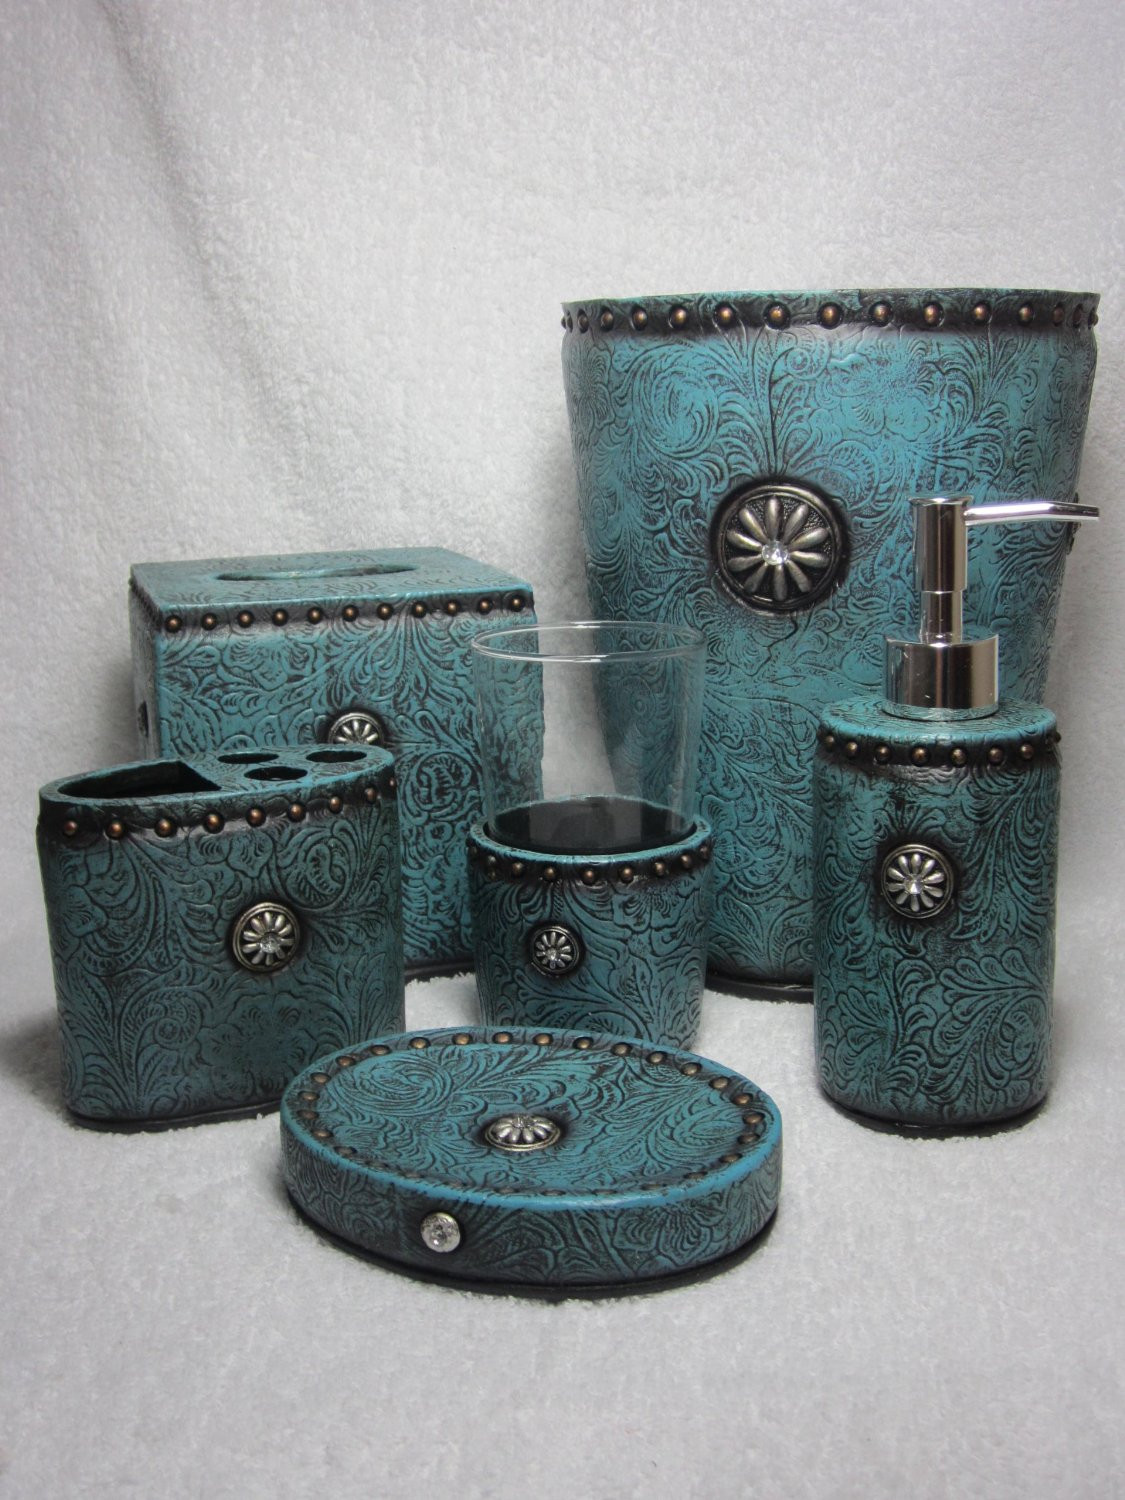 Turquoise Bathroom Decor
 Turquoise Bathroom Accessories Western Hardware s And